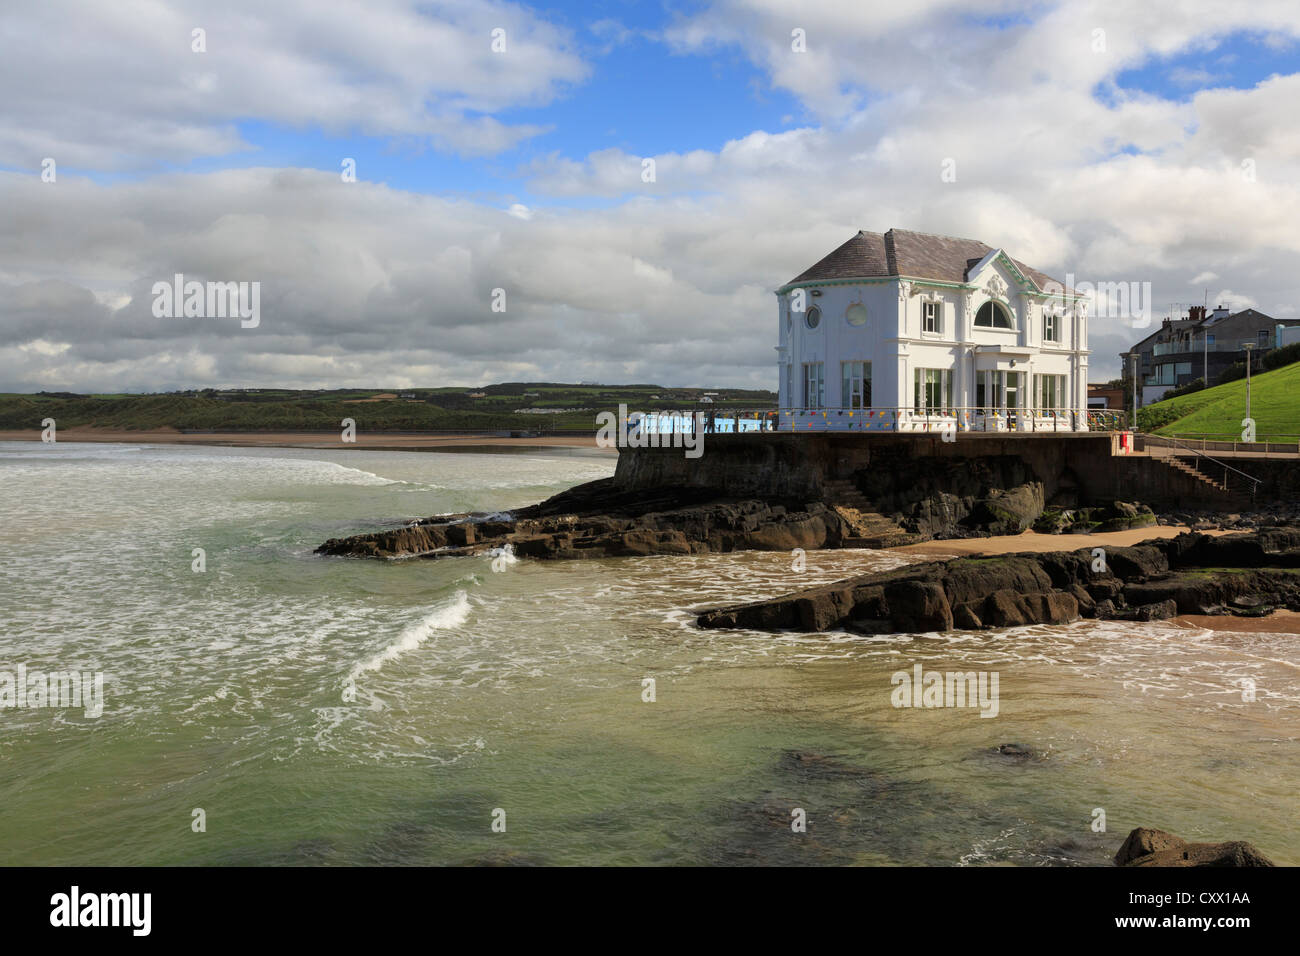 The Arcadia building on the seafront at East Strand beach in Portrush, County Antrim, Northern Ireland, UK Stock Photo